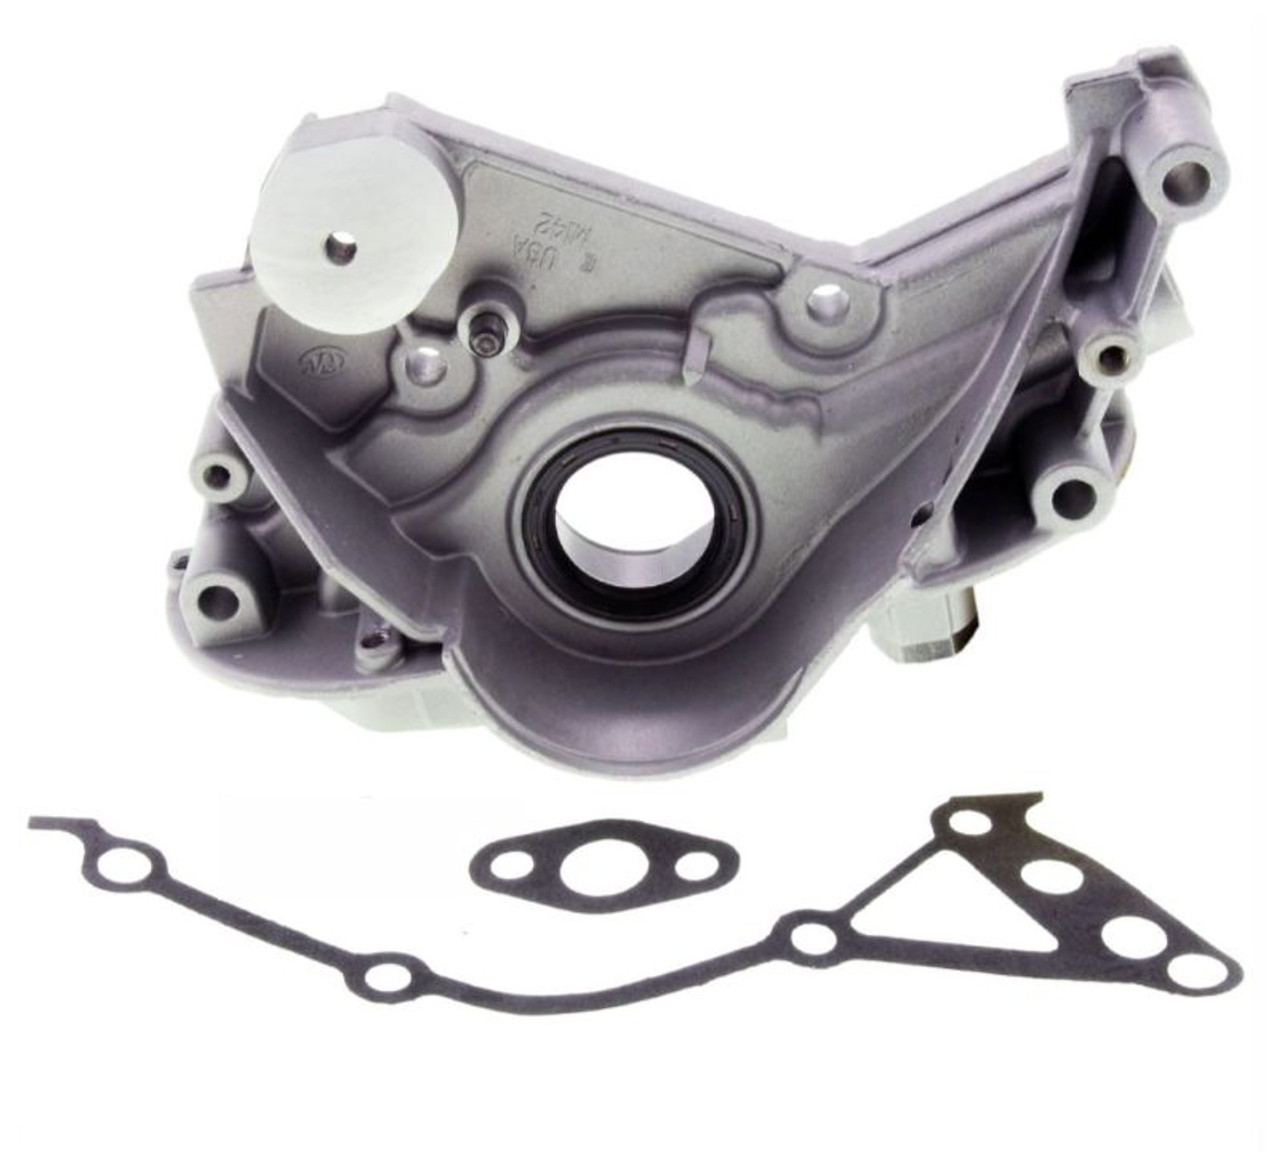 1989 Plymouth Grand Voyager 3.0L Engine Oil Pump EP142 -19